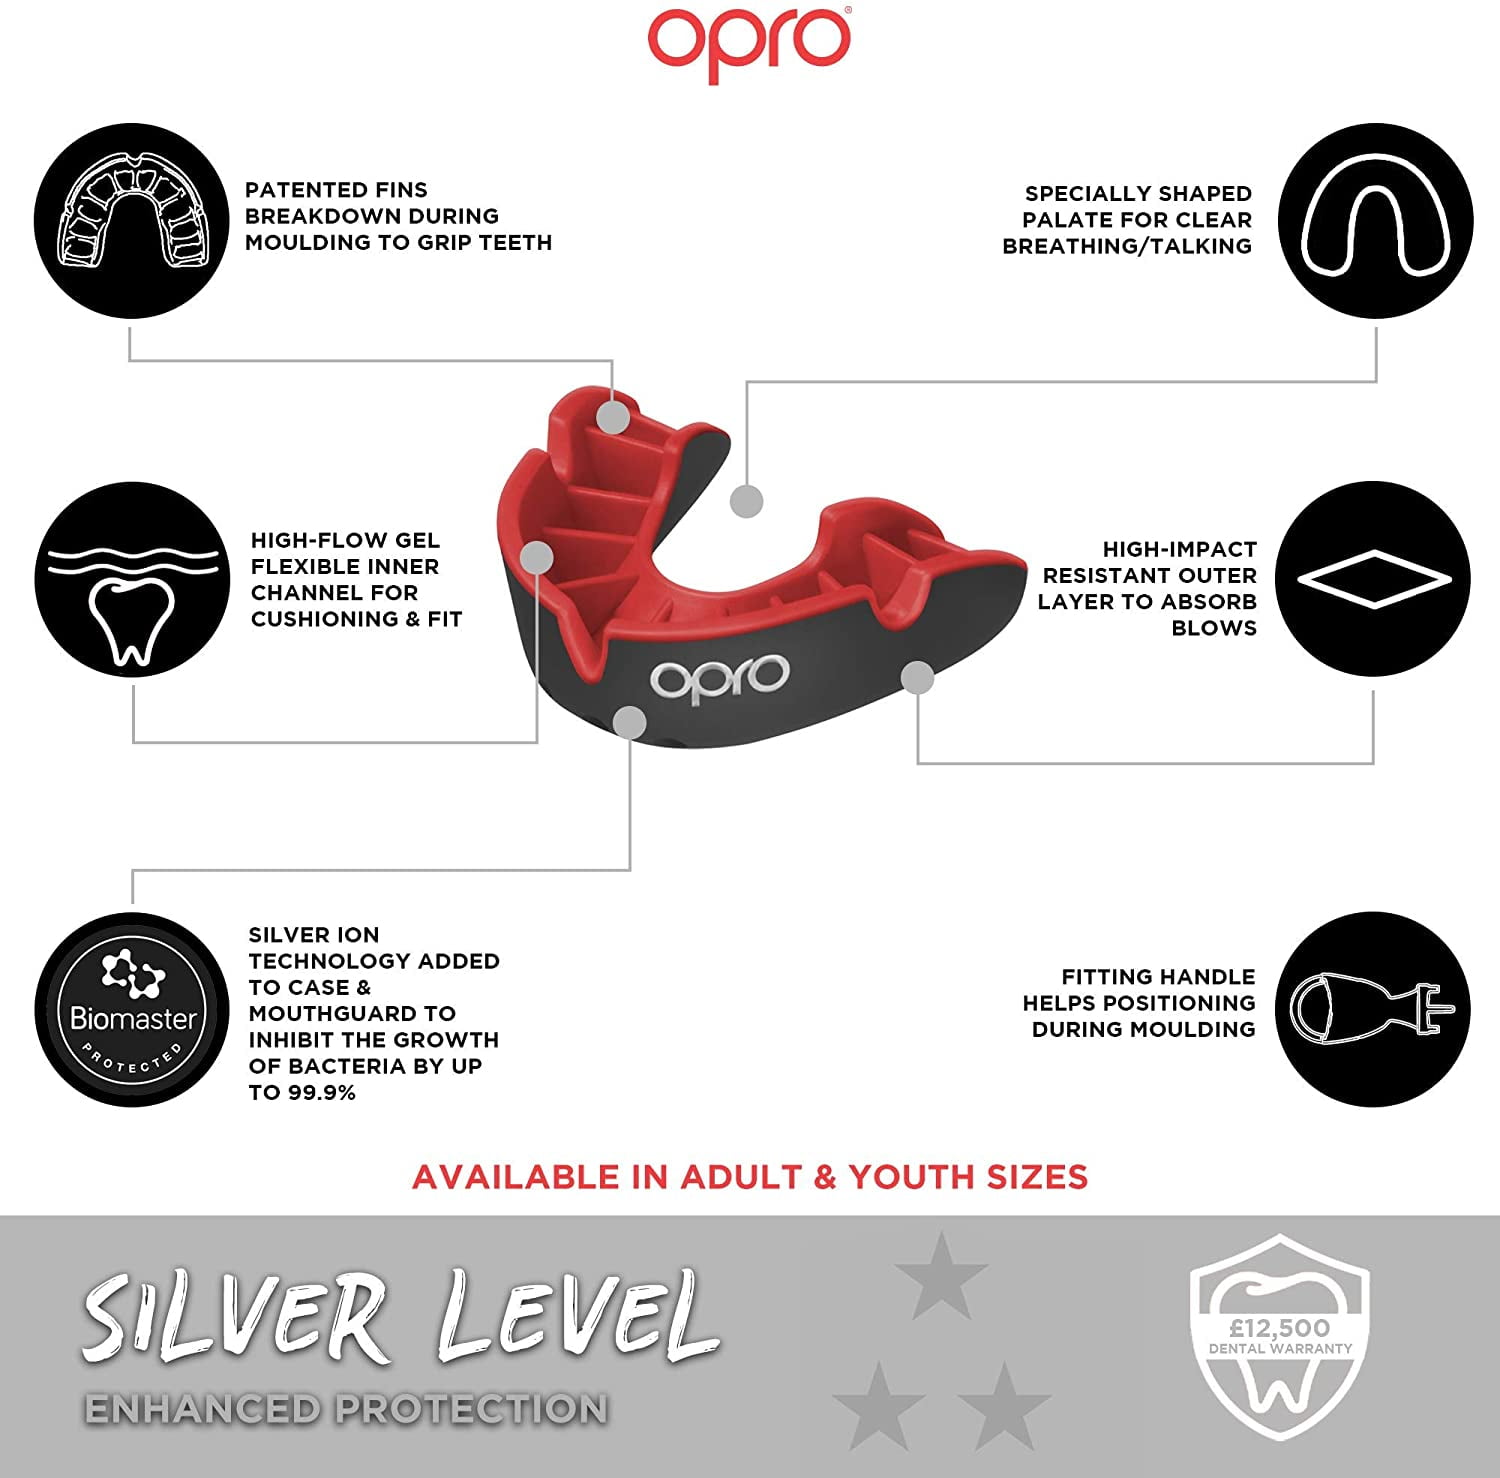 Hockey 18 Month Extended Warranty for Braces Mouthguard for Rugby OPRO Gold Level Boxing and Other Contact Sports 